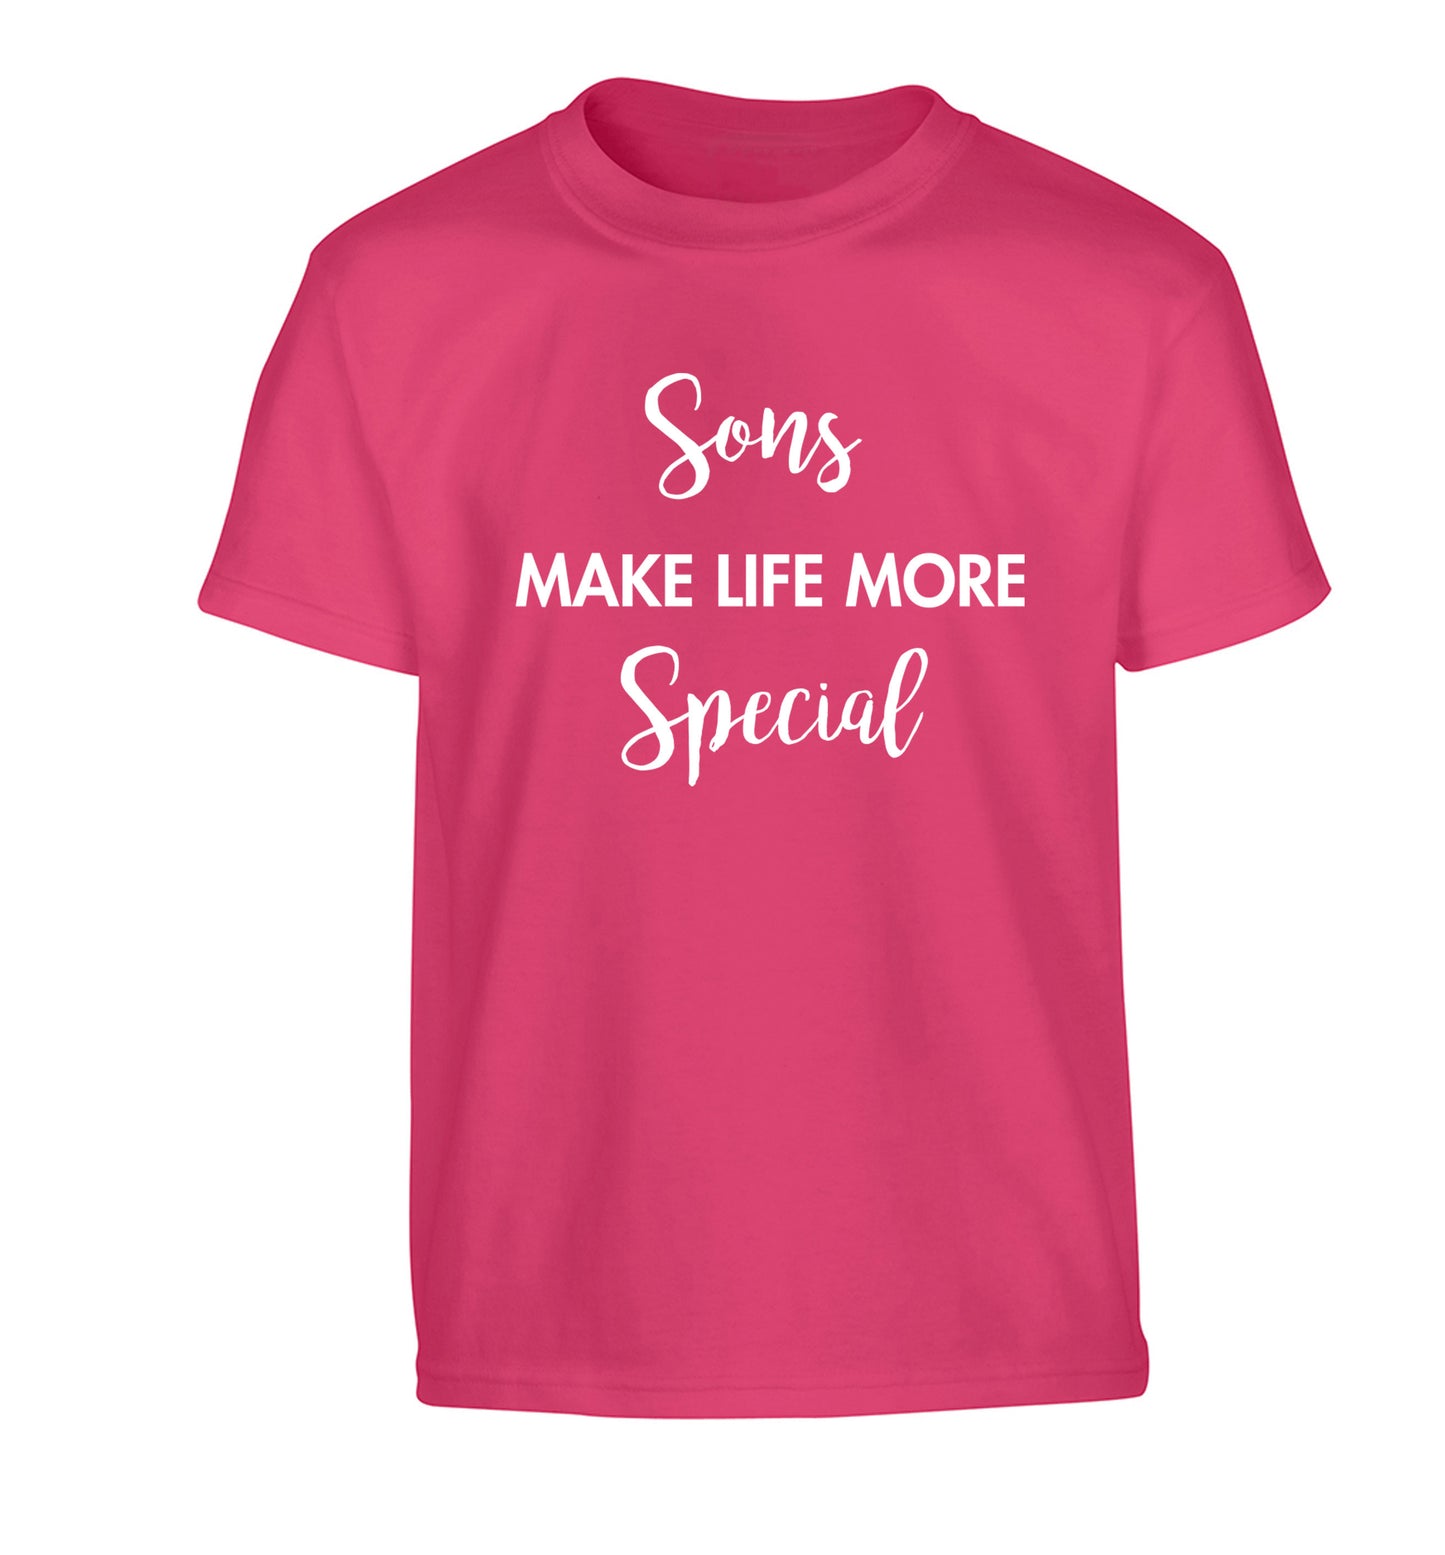 Daughters make life more special Children's pink Tshirt 12-14 Years